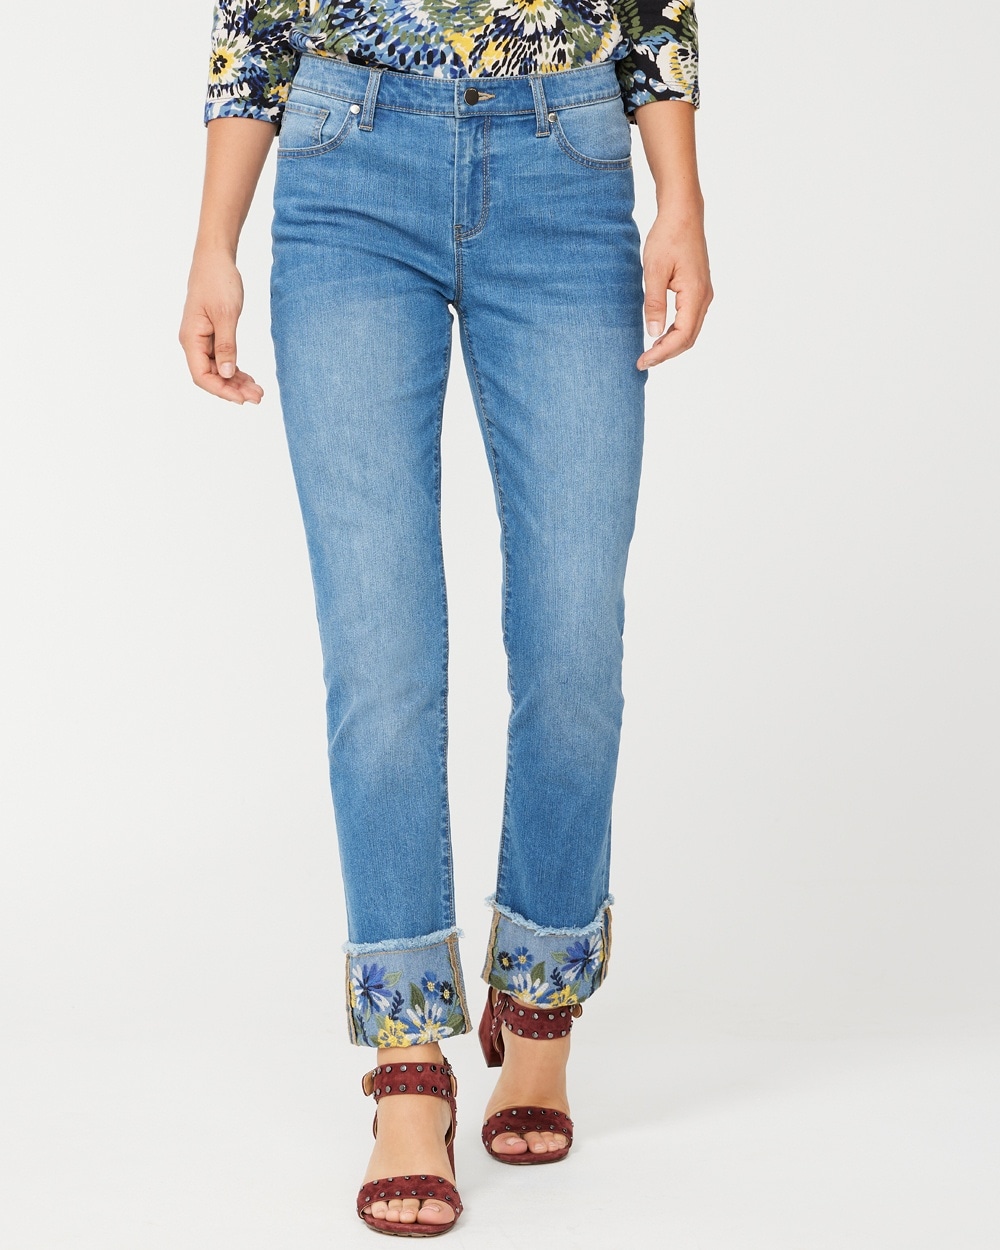 Embroidered Cuff Girlfriend Ankle Jeans